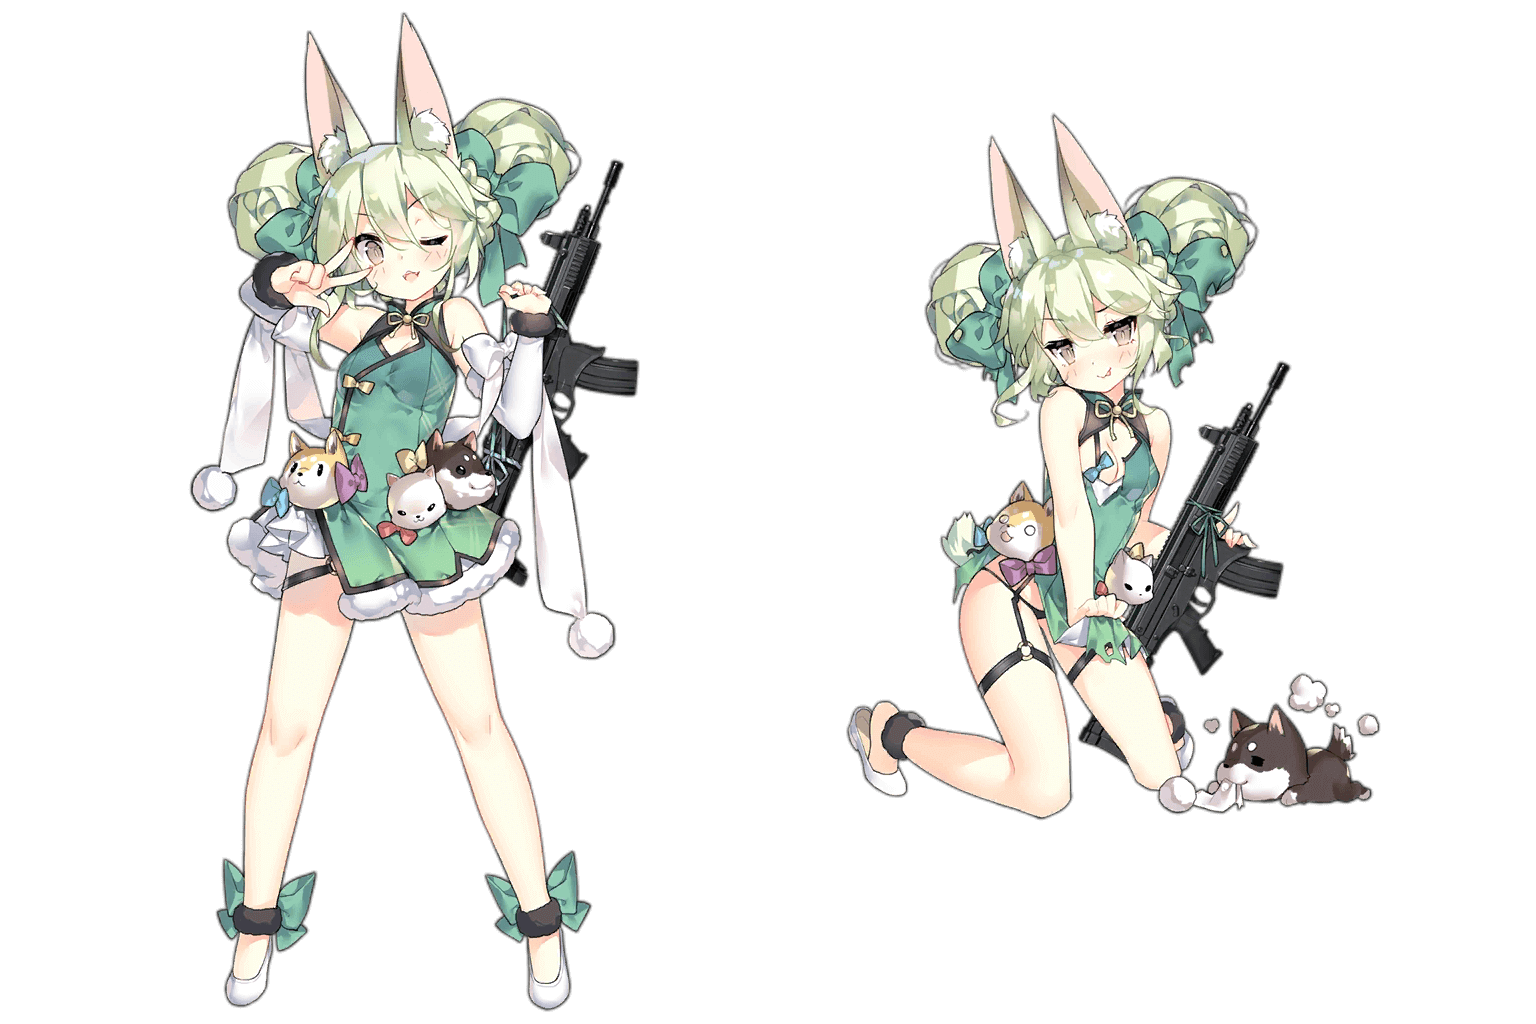 ART556's "White Cabbage" costume, normal and damaged art